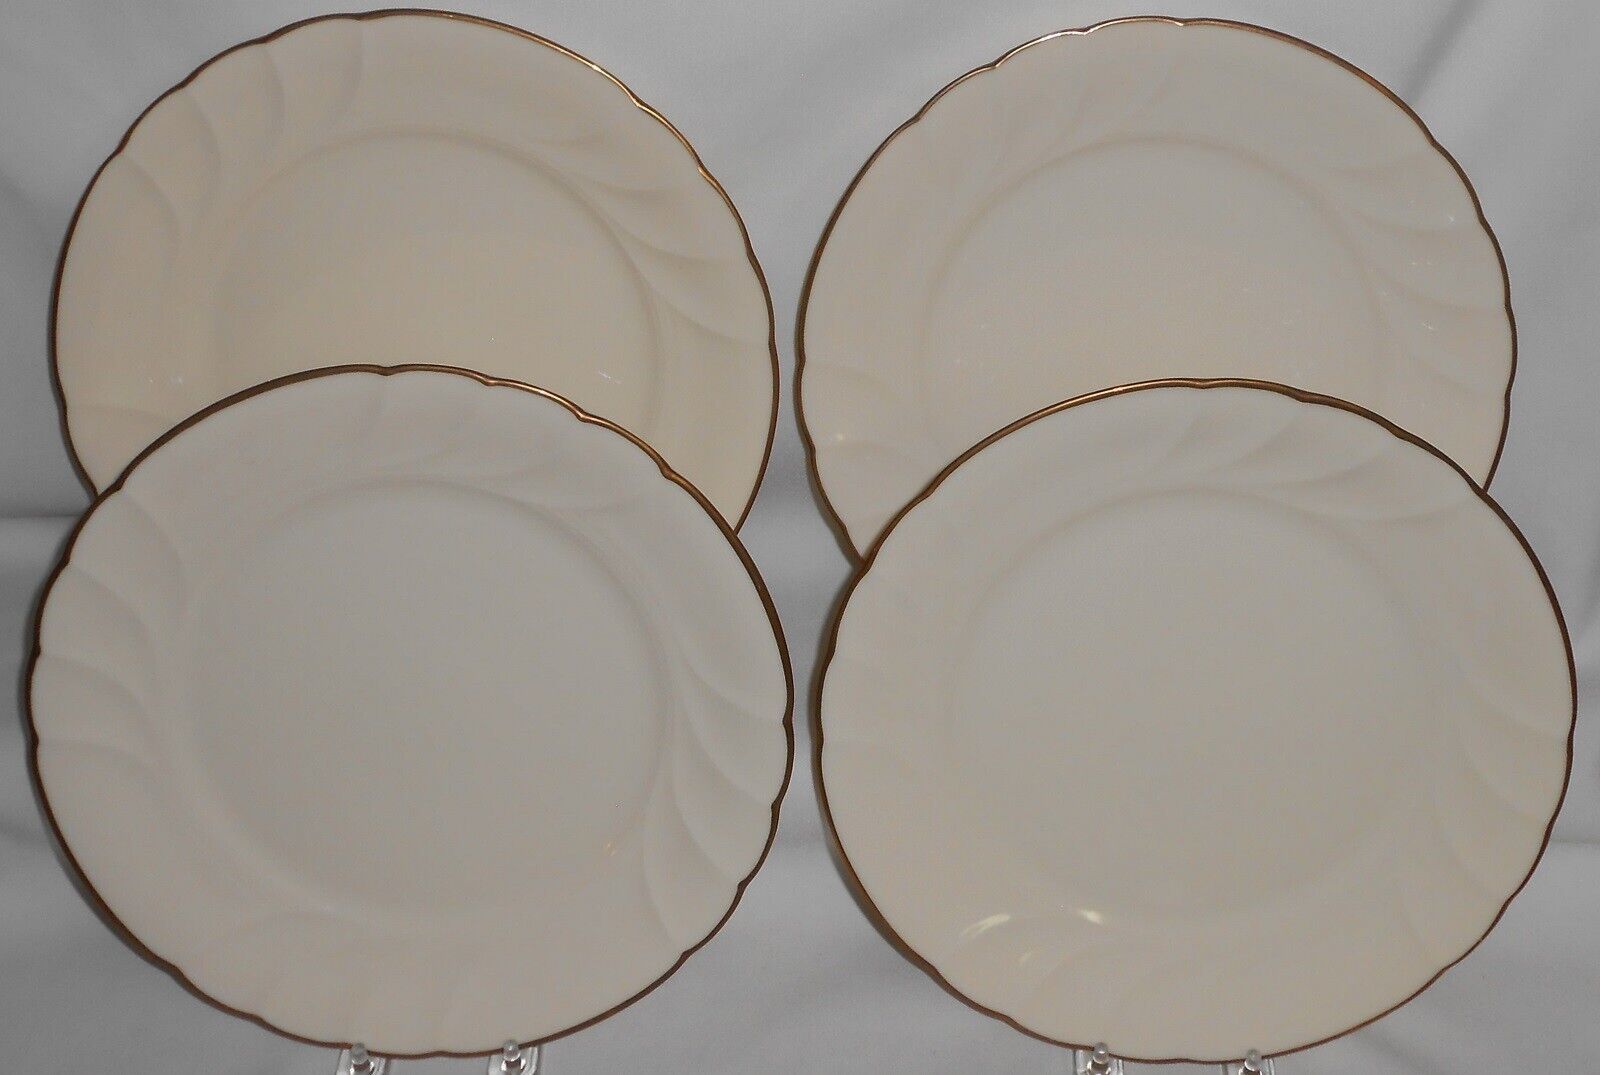 Primary image for Set (4) MIKASA Fine Ivory SPUNSILK PATTERN Dinner Plates MADE IN JAPAN